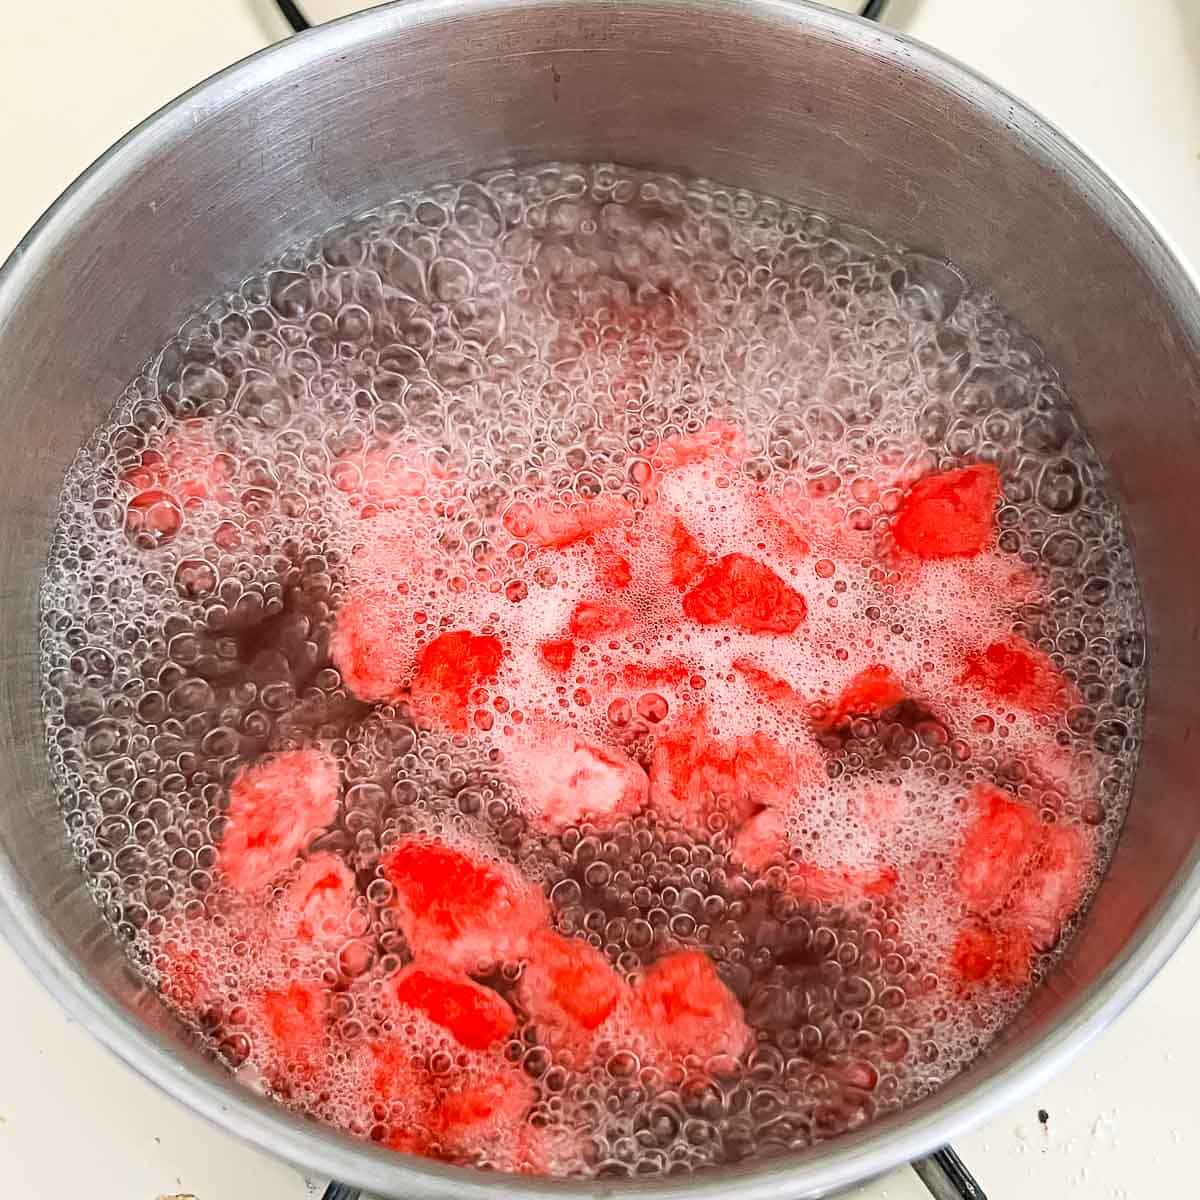 water chestnuts being boiled in a pot